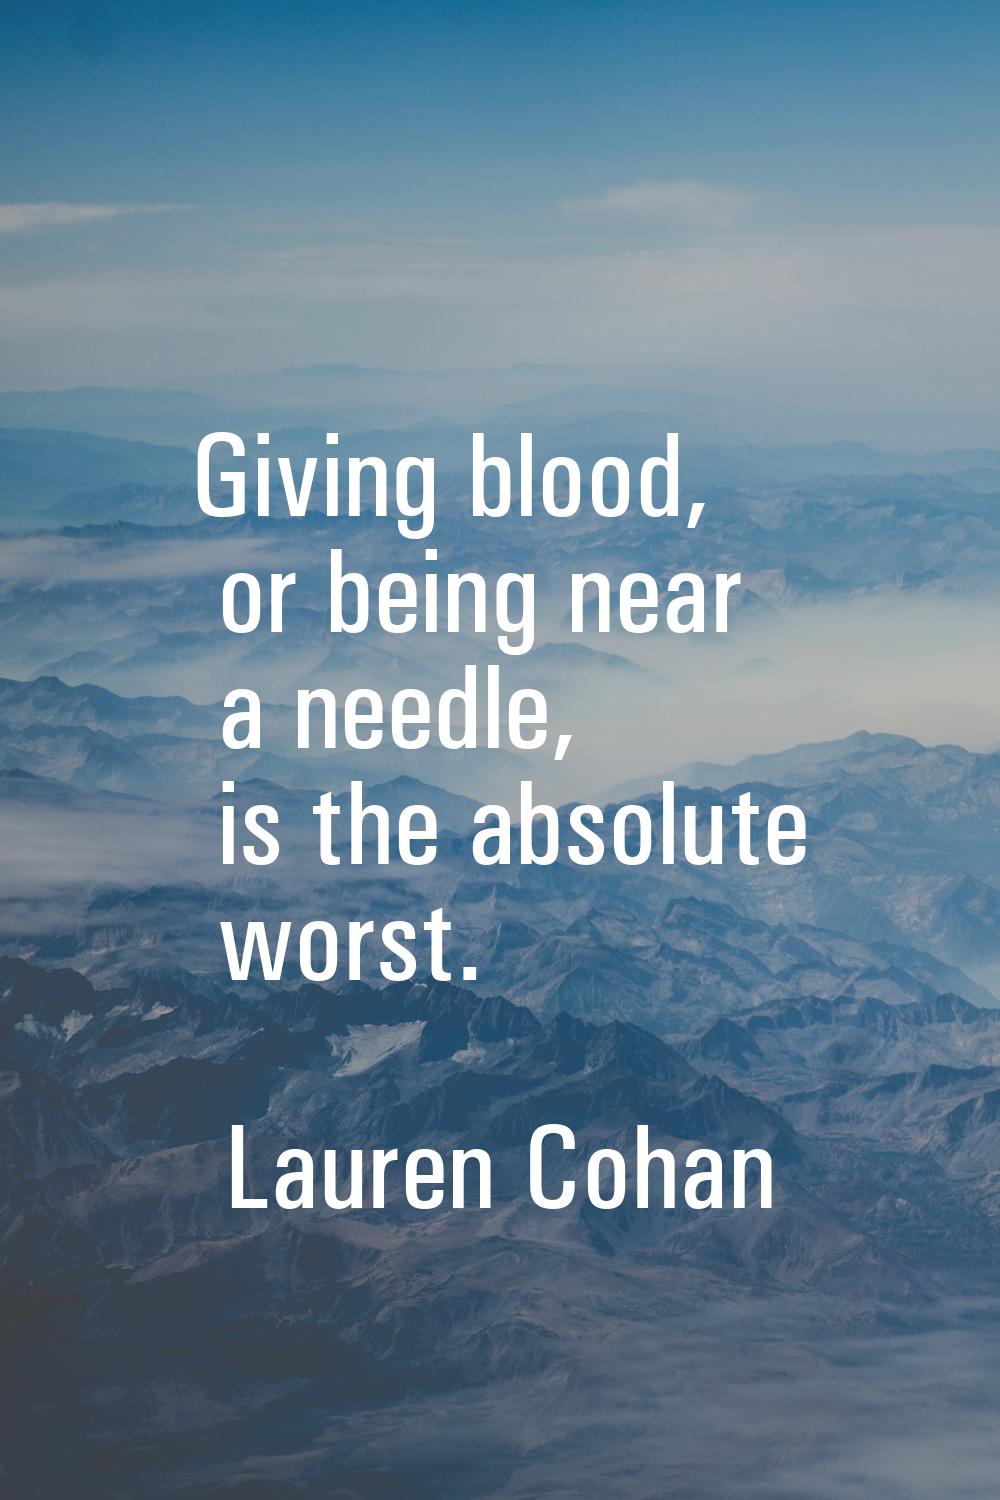 Giving blood, or being near a needle, is the absolute worst.